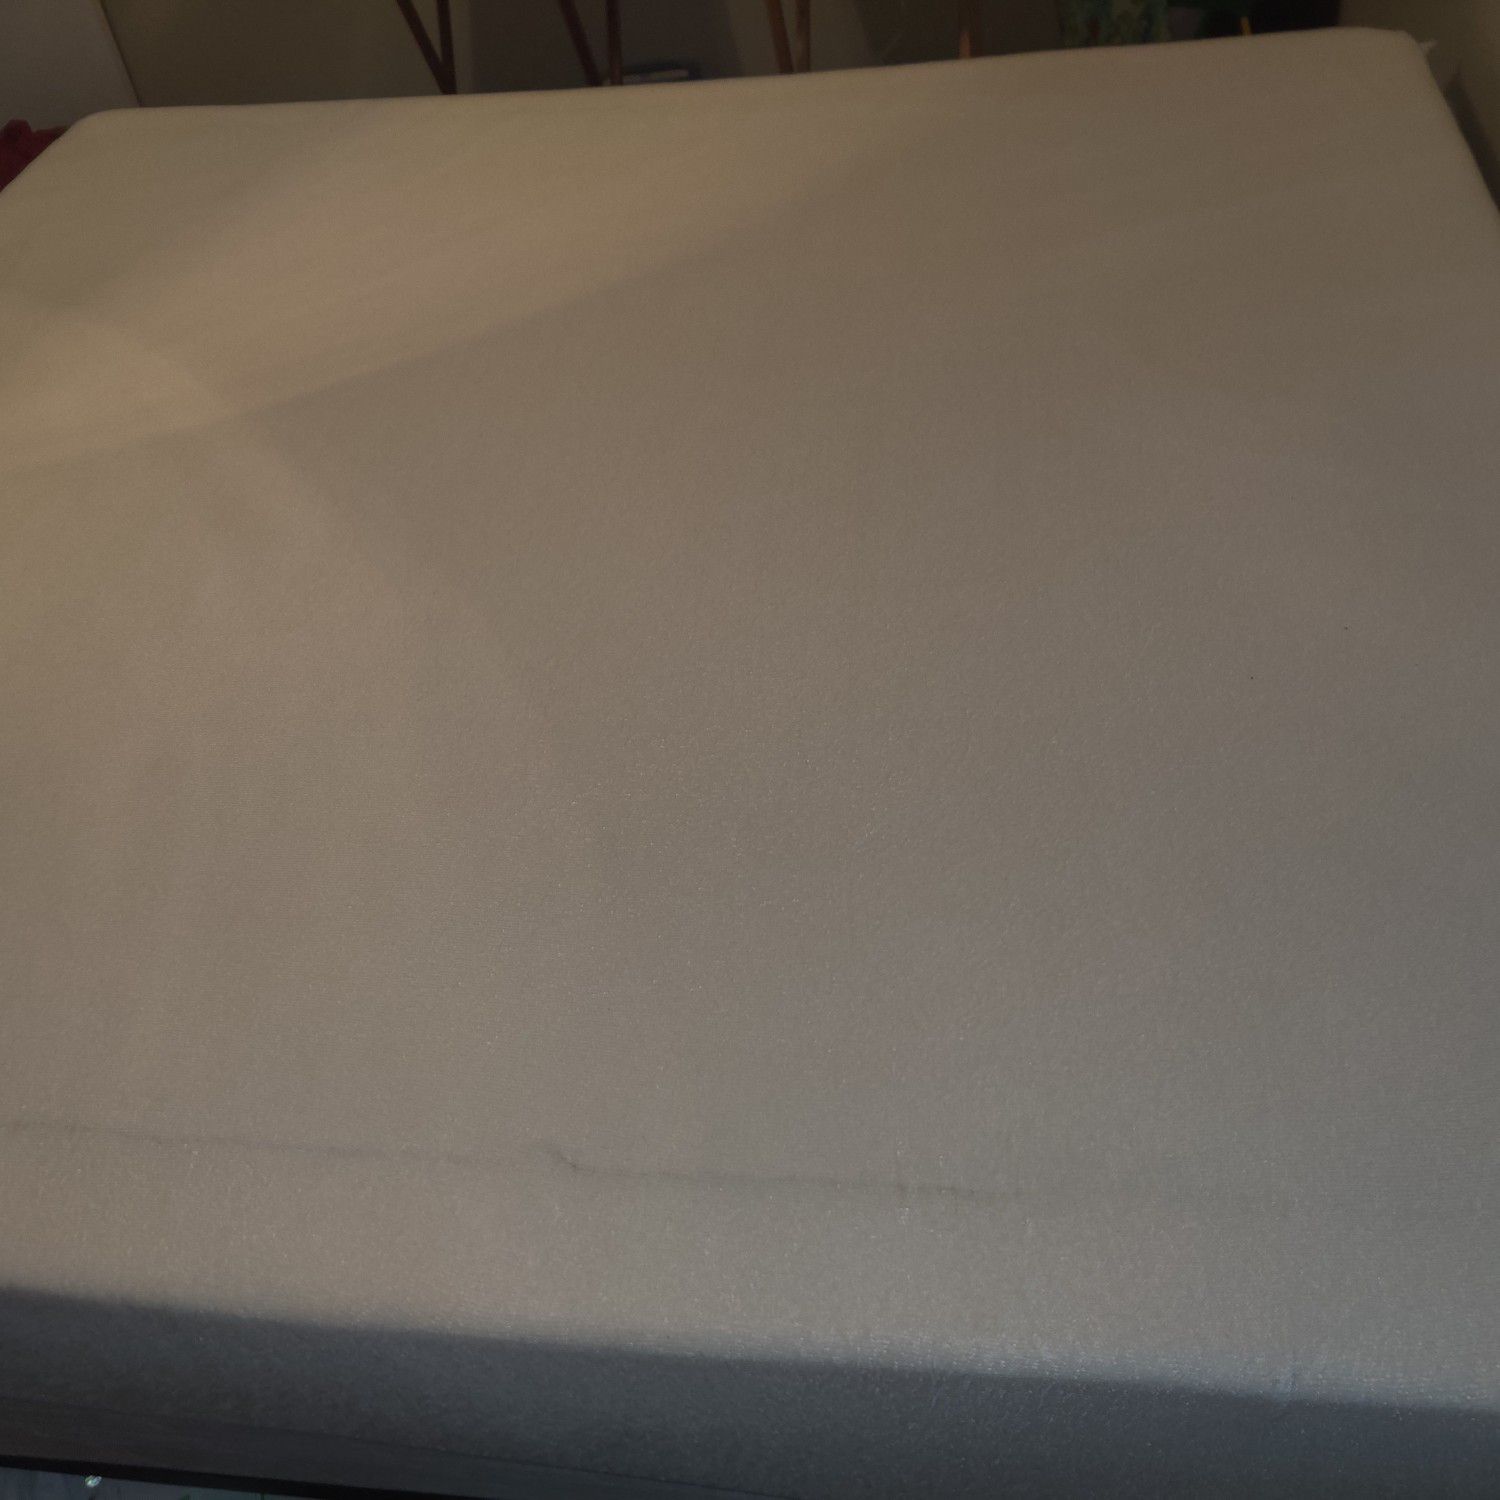 King size memory foam mattress less than a yr old box springs and frame